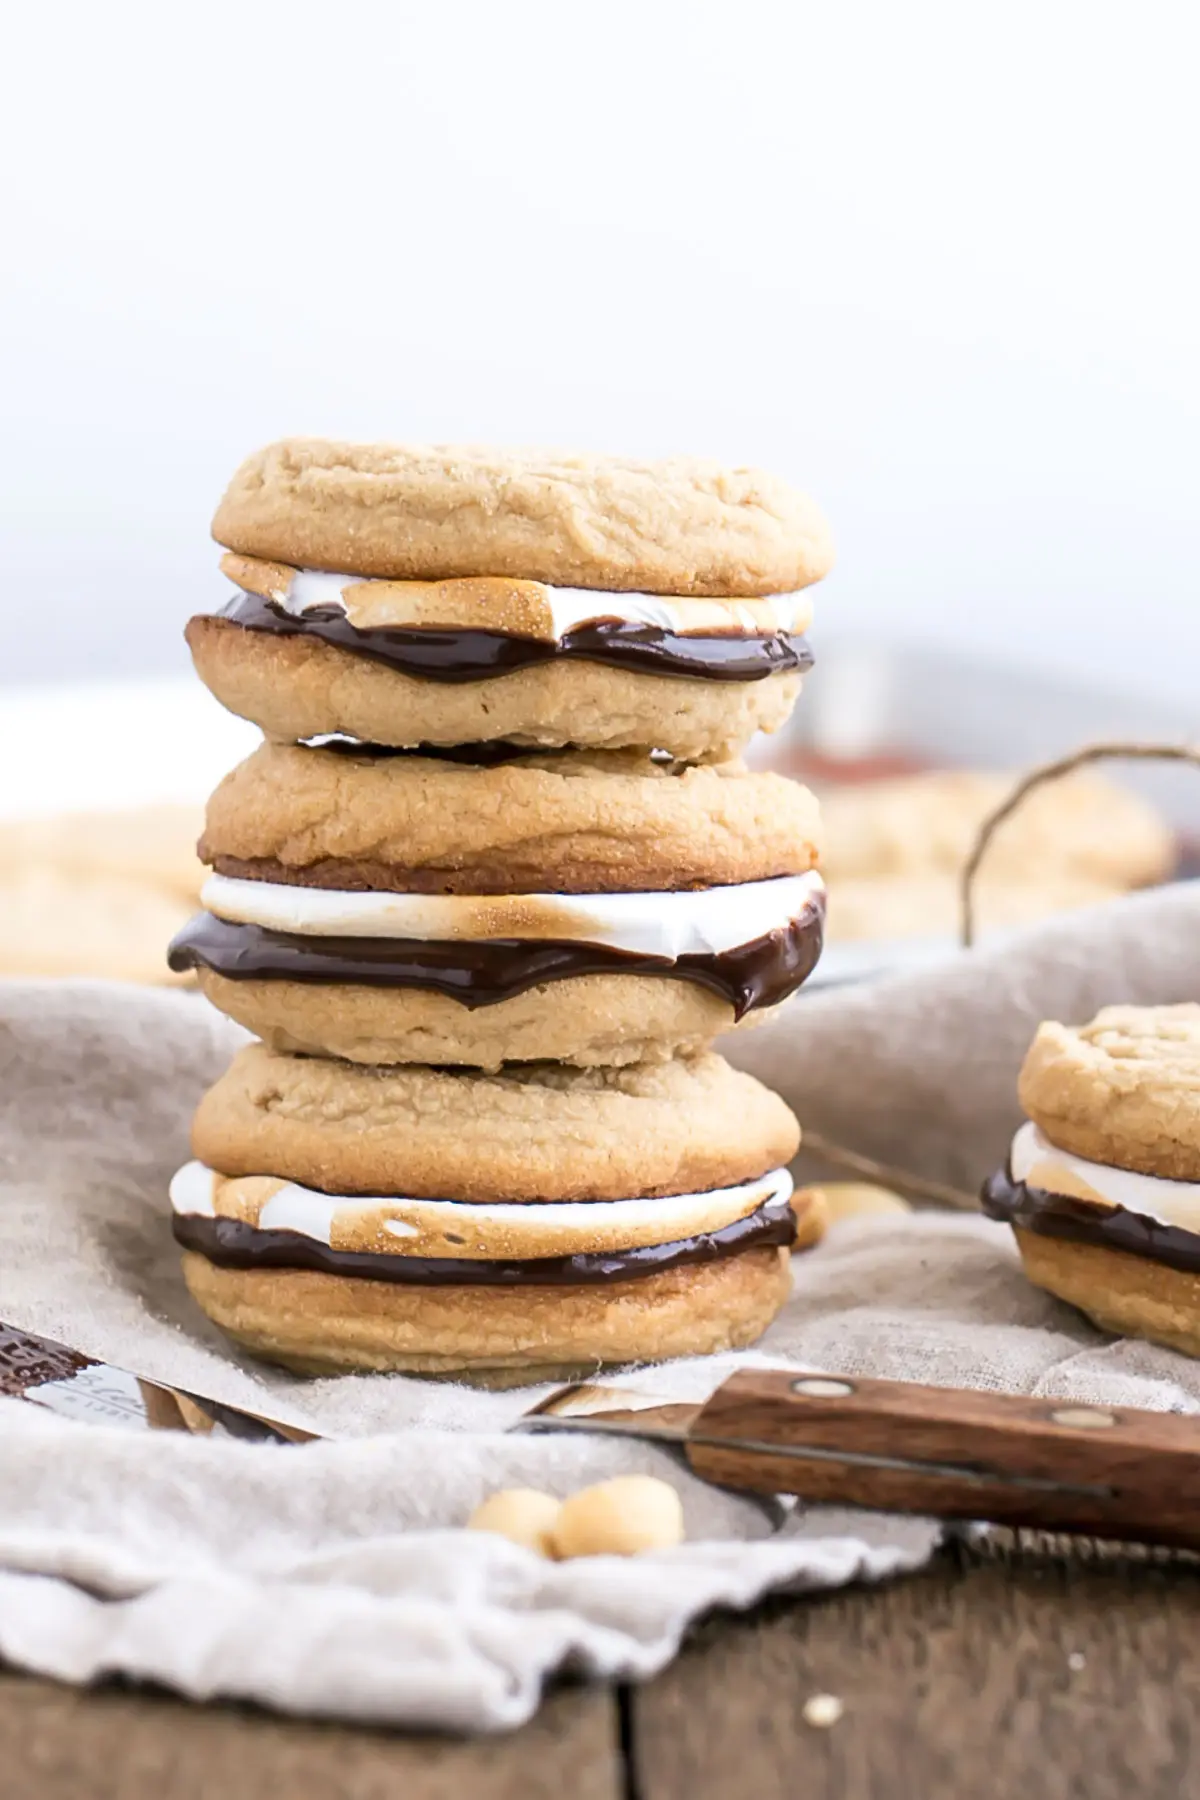 Three sandwiched cookies stacked.